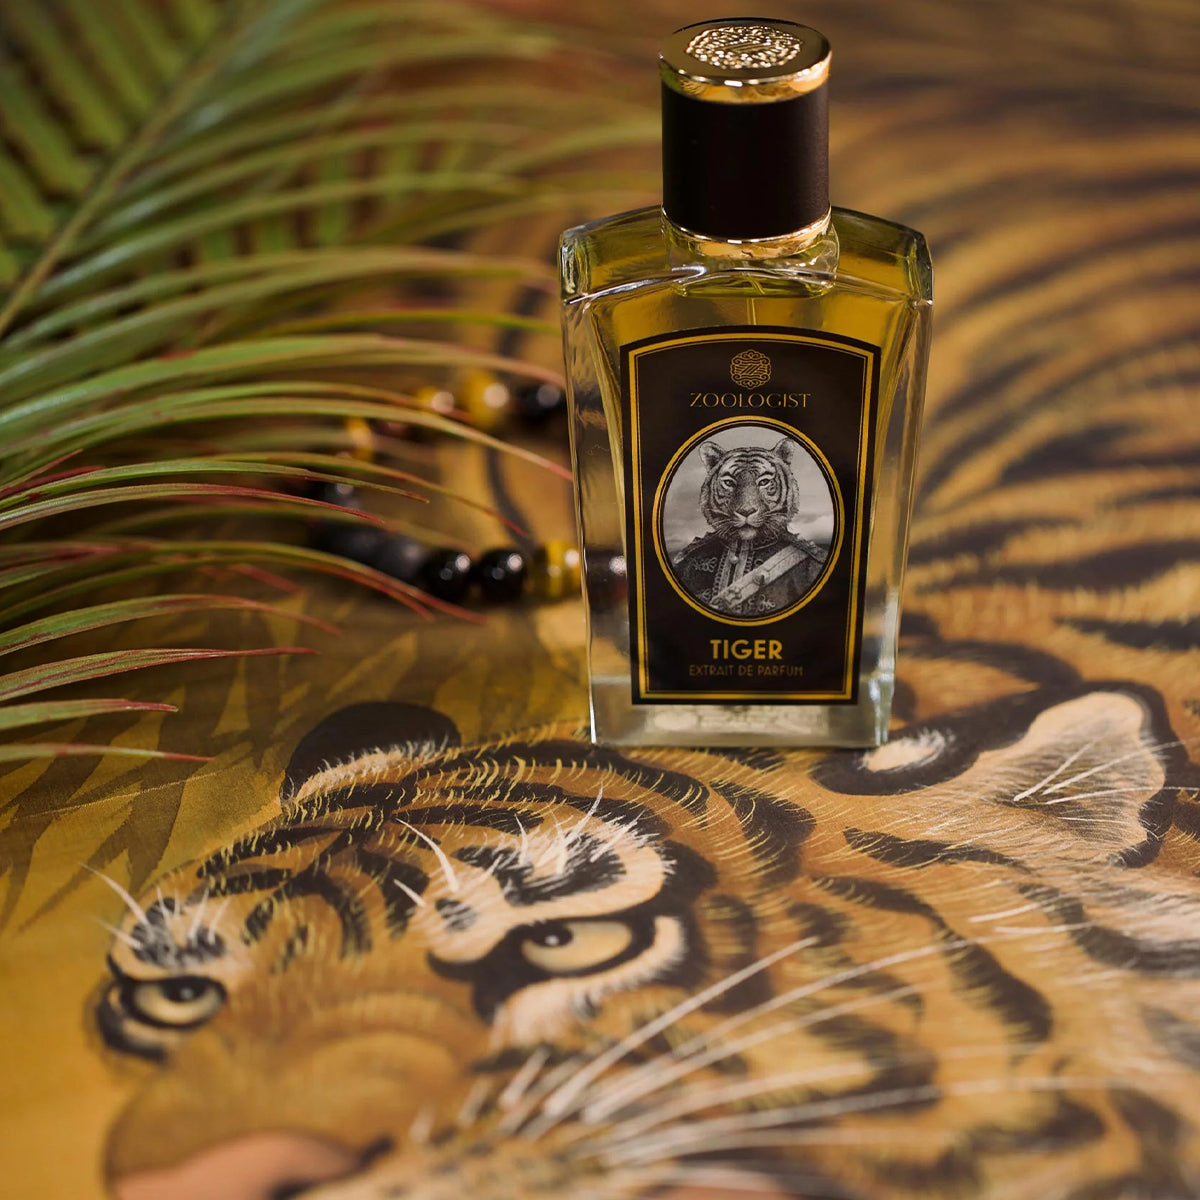 Tiger - Zoologist - EP 60ml